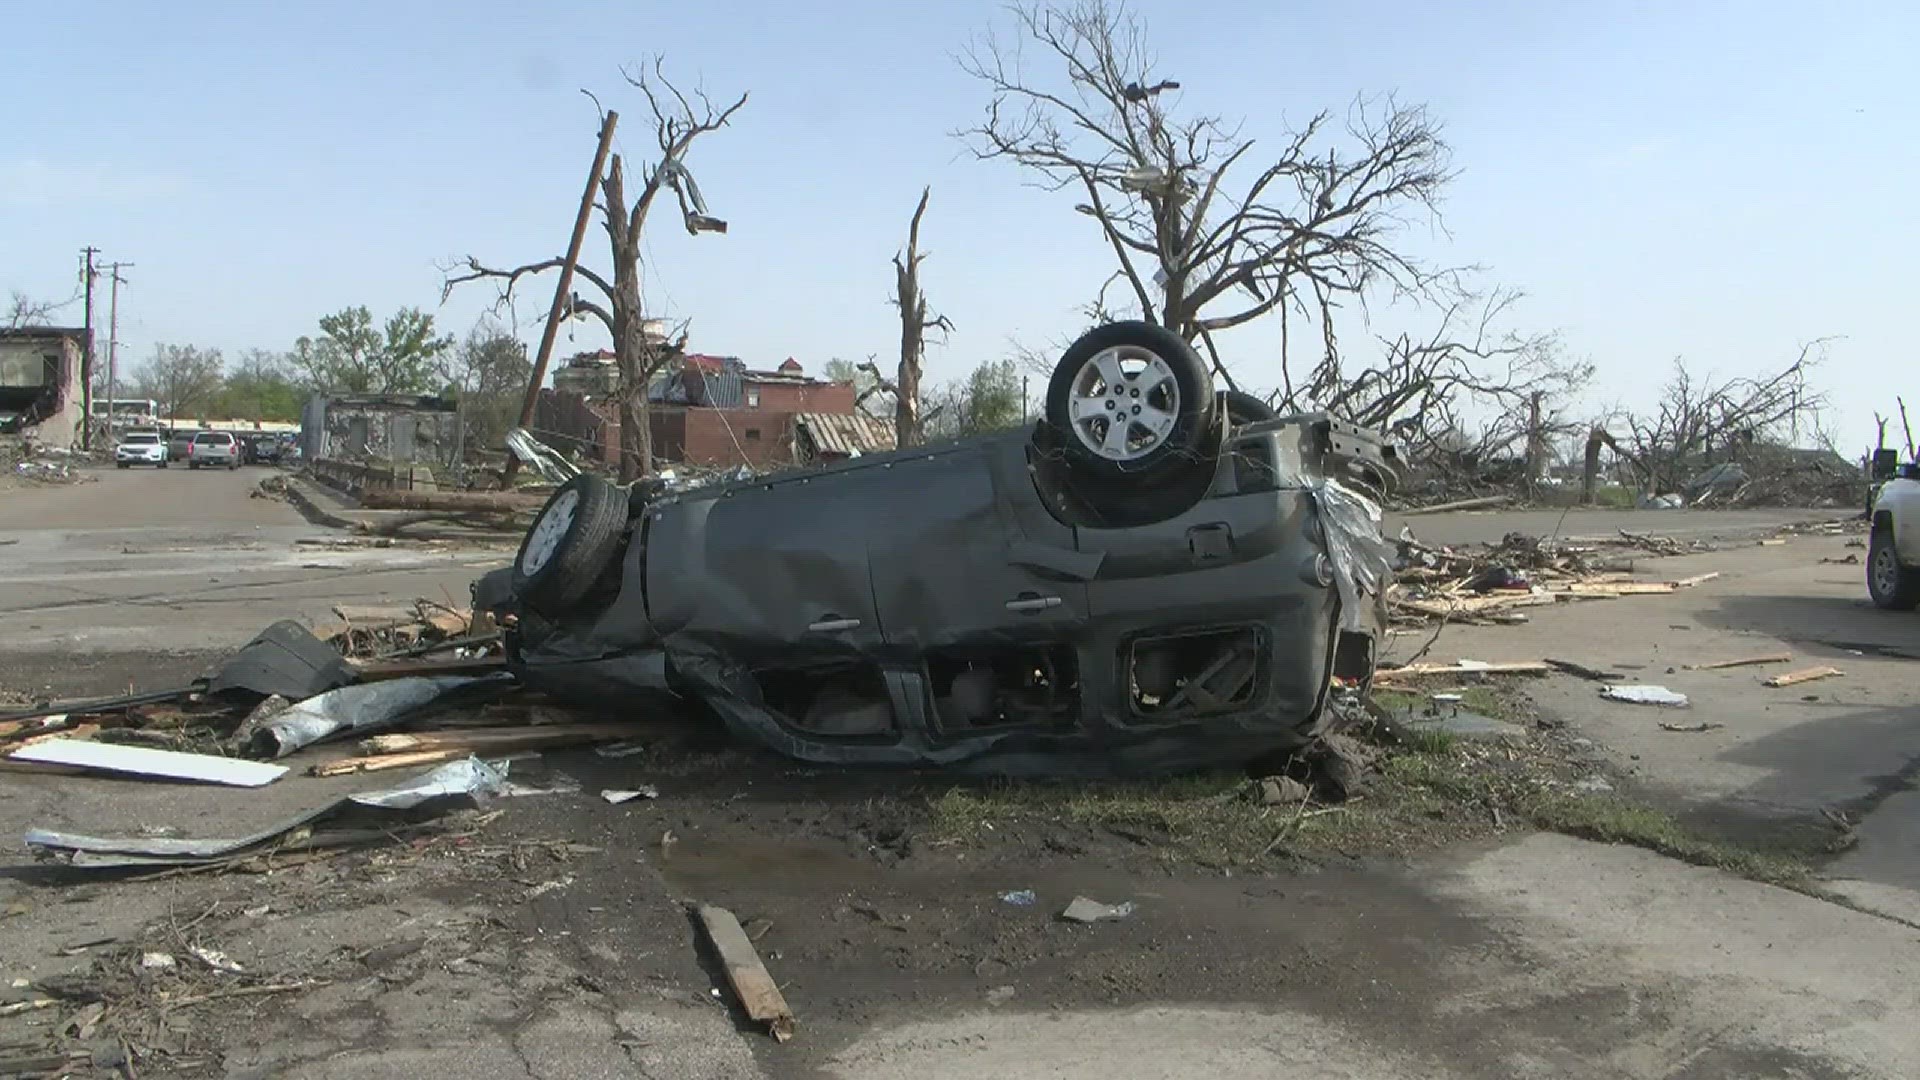 The governor of Mississippi has declared a state of emergency. Biden offered full federal support in recovery efforts.